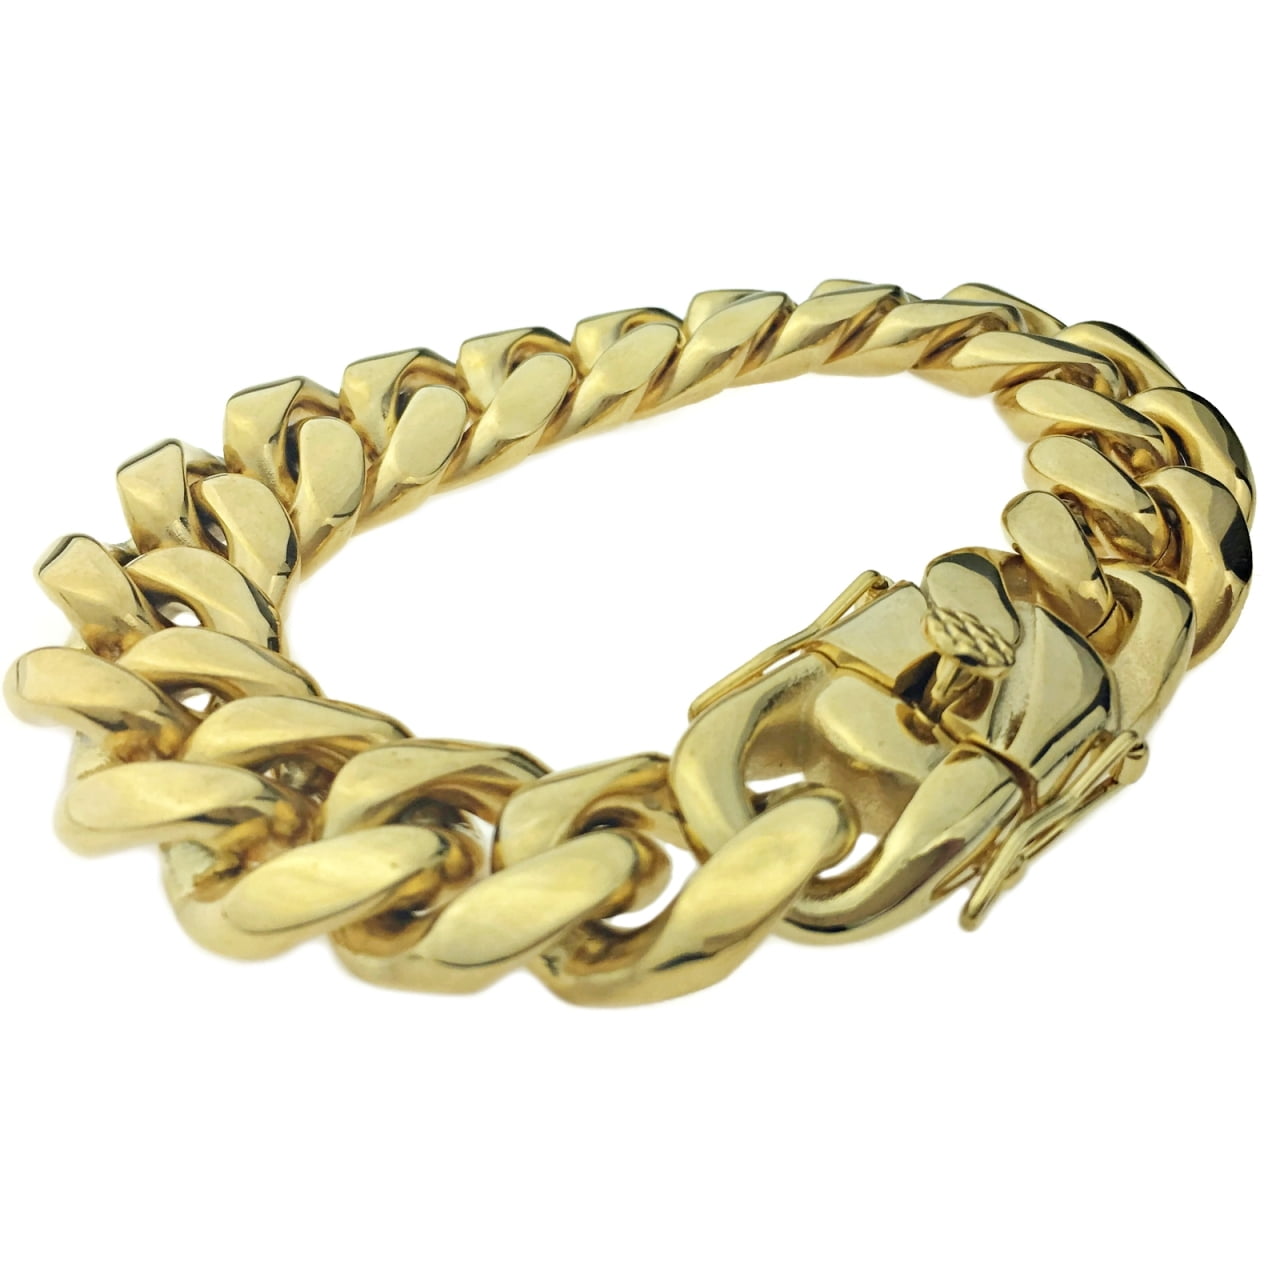 Mens Miami Cuban Link Chain Bracelet Heavy 14K Gold Plated Stainless Steel 18mm 